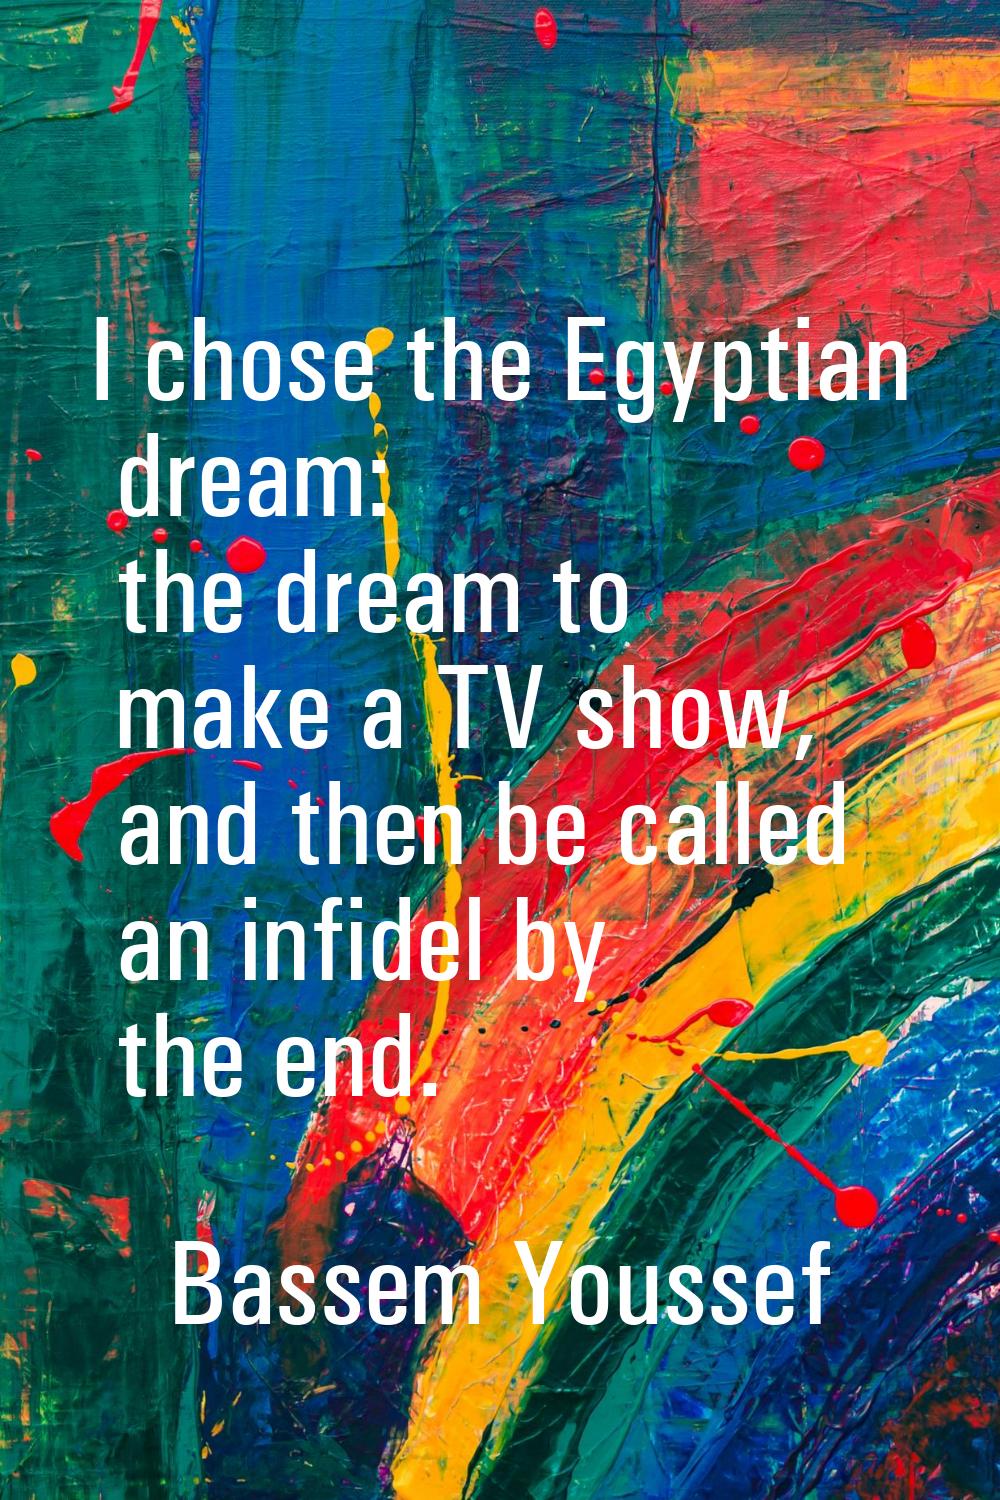 I chose the Egyptian dream: the dream to make a TV show, and then be called an infidel by the end.